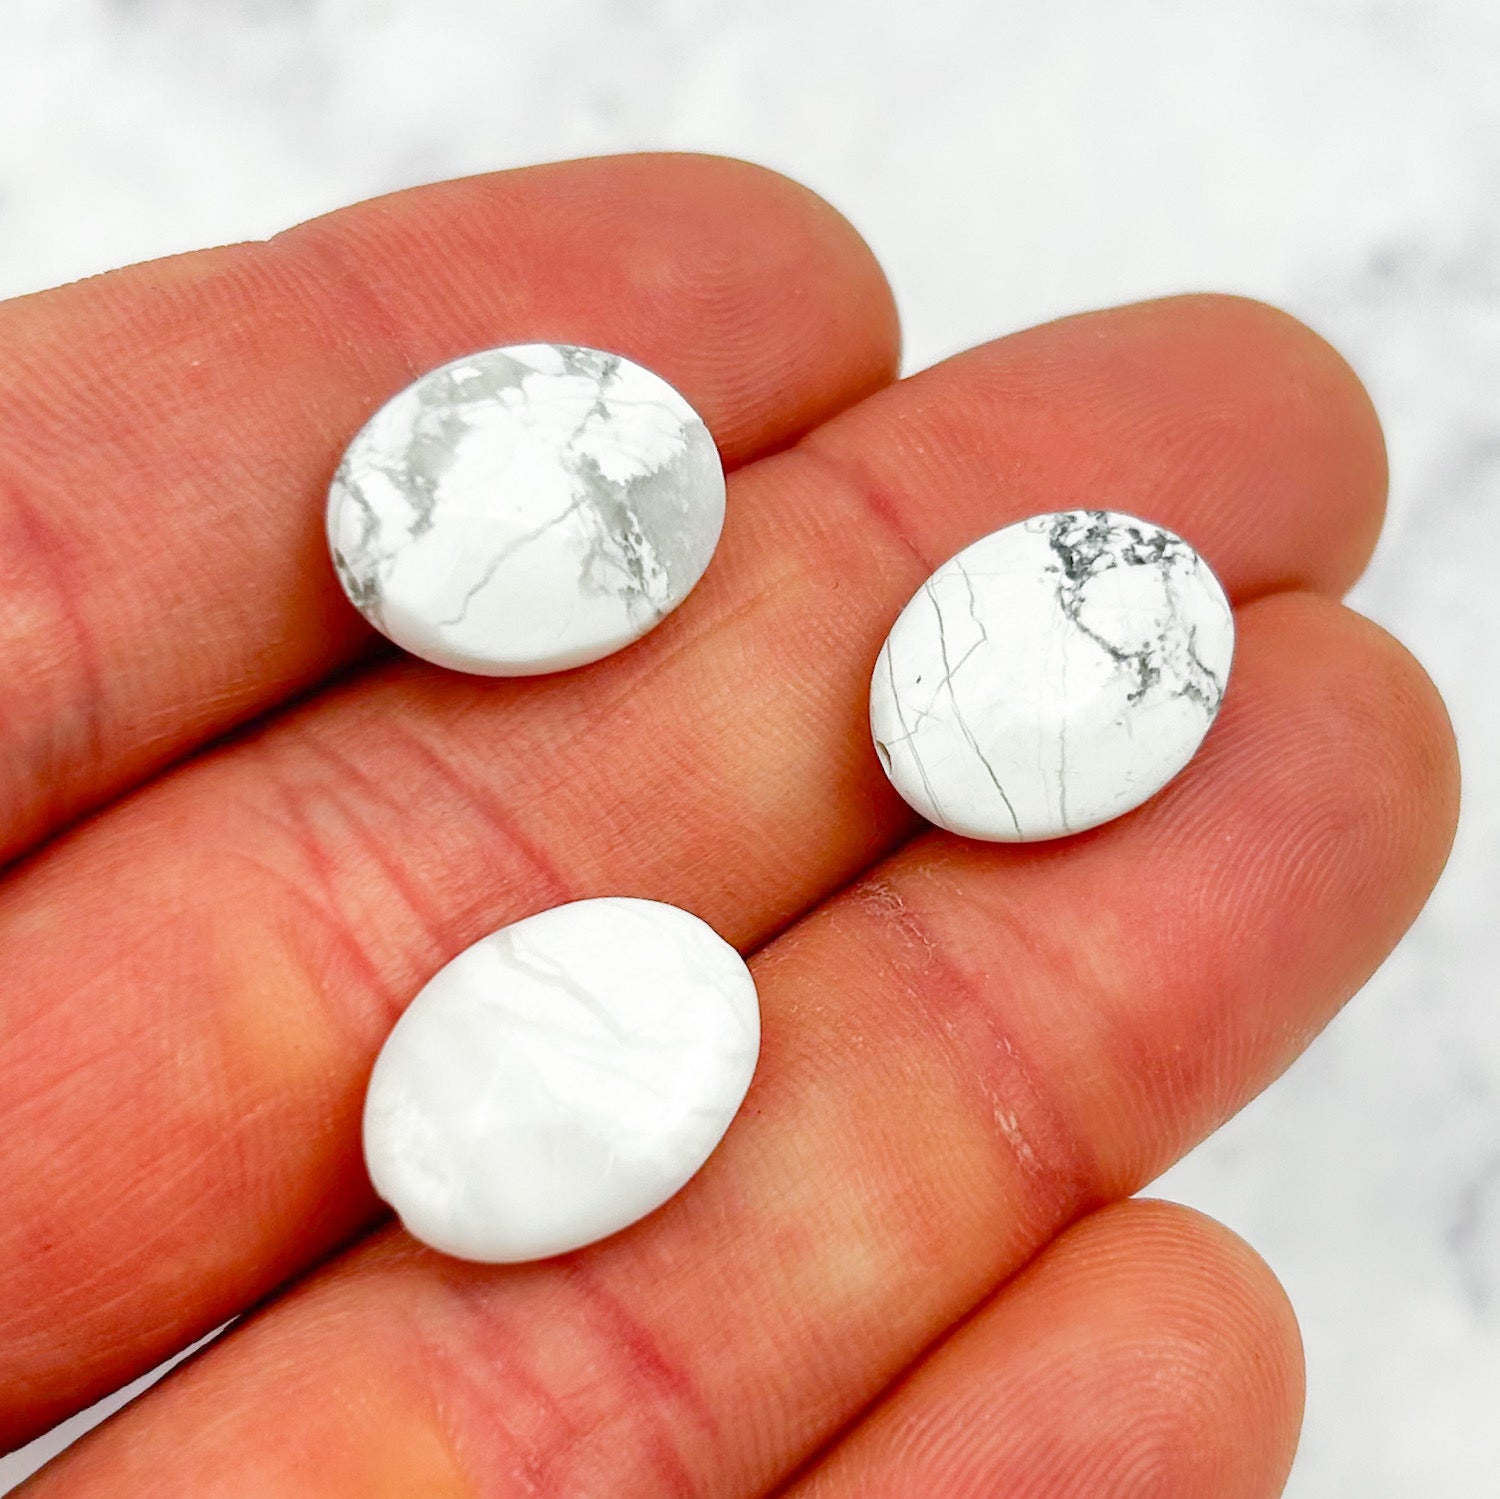 17mm Howlite White Faceted Oval Focal Bead Pack (3 Beads)